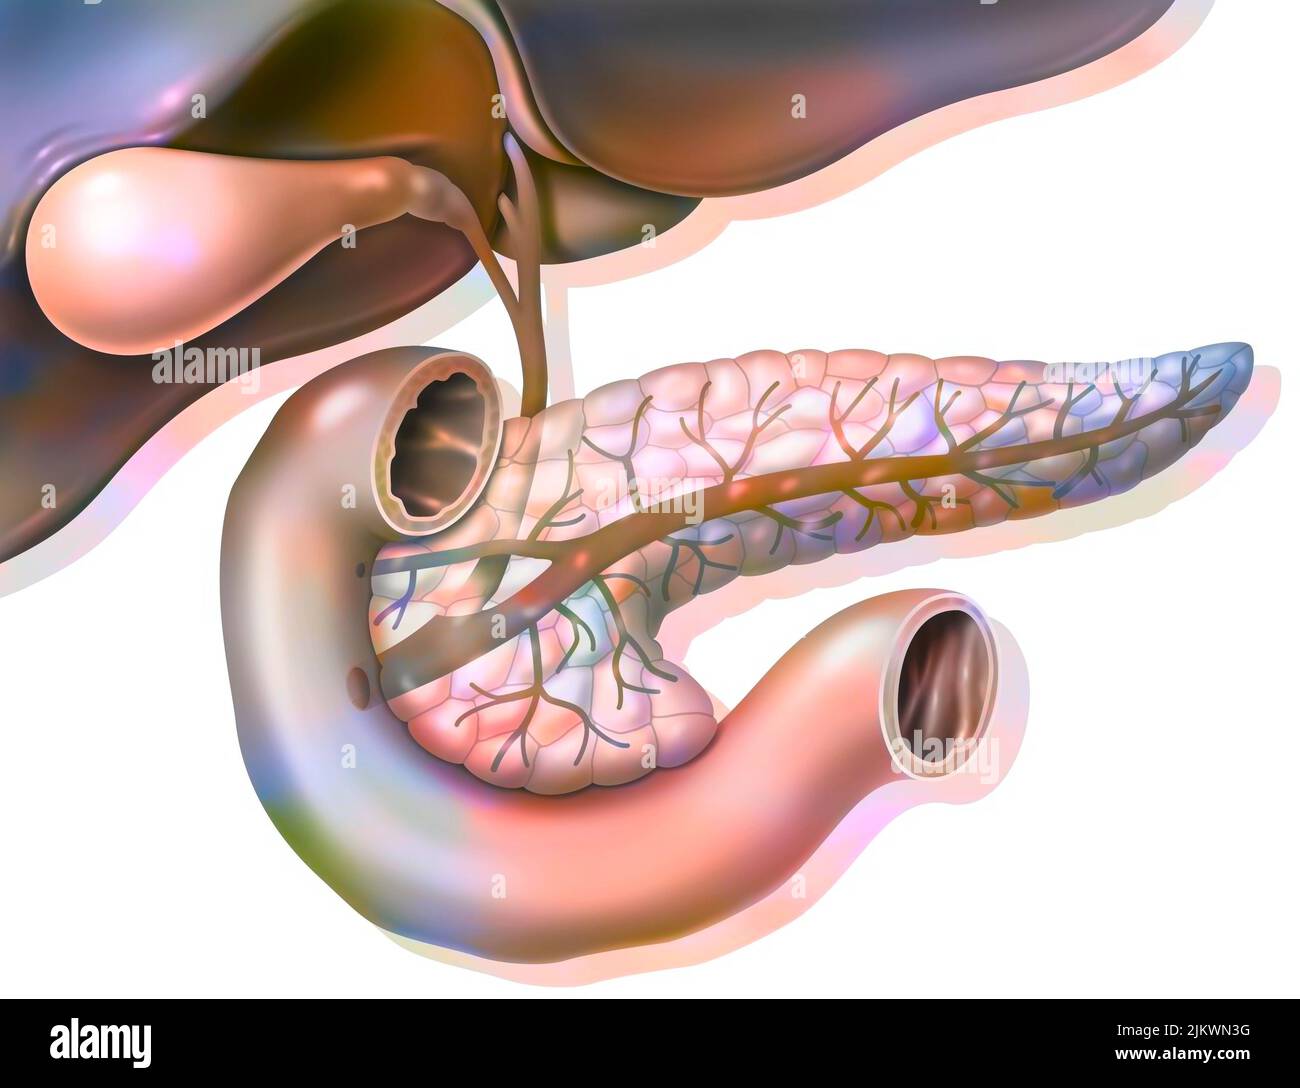 Anatomy of the pancreas in anterior view with gallbladder and common bile duct. Stock Photo